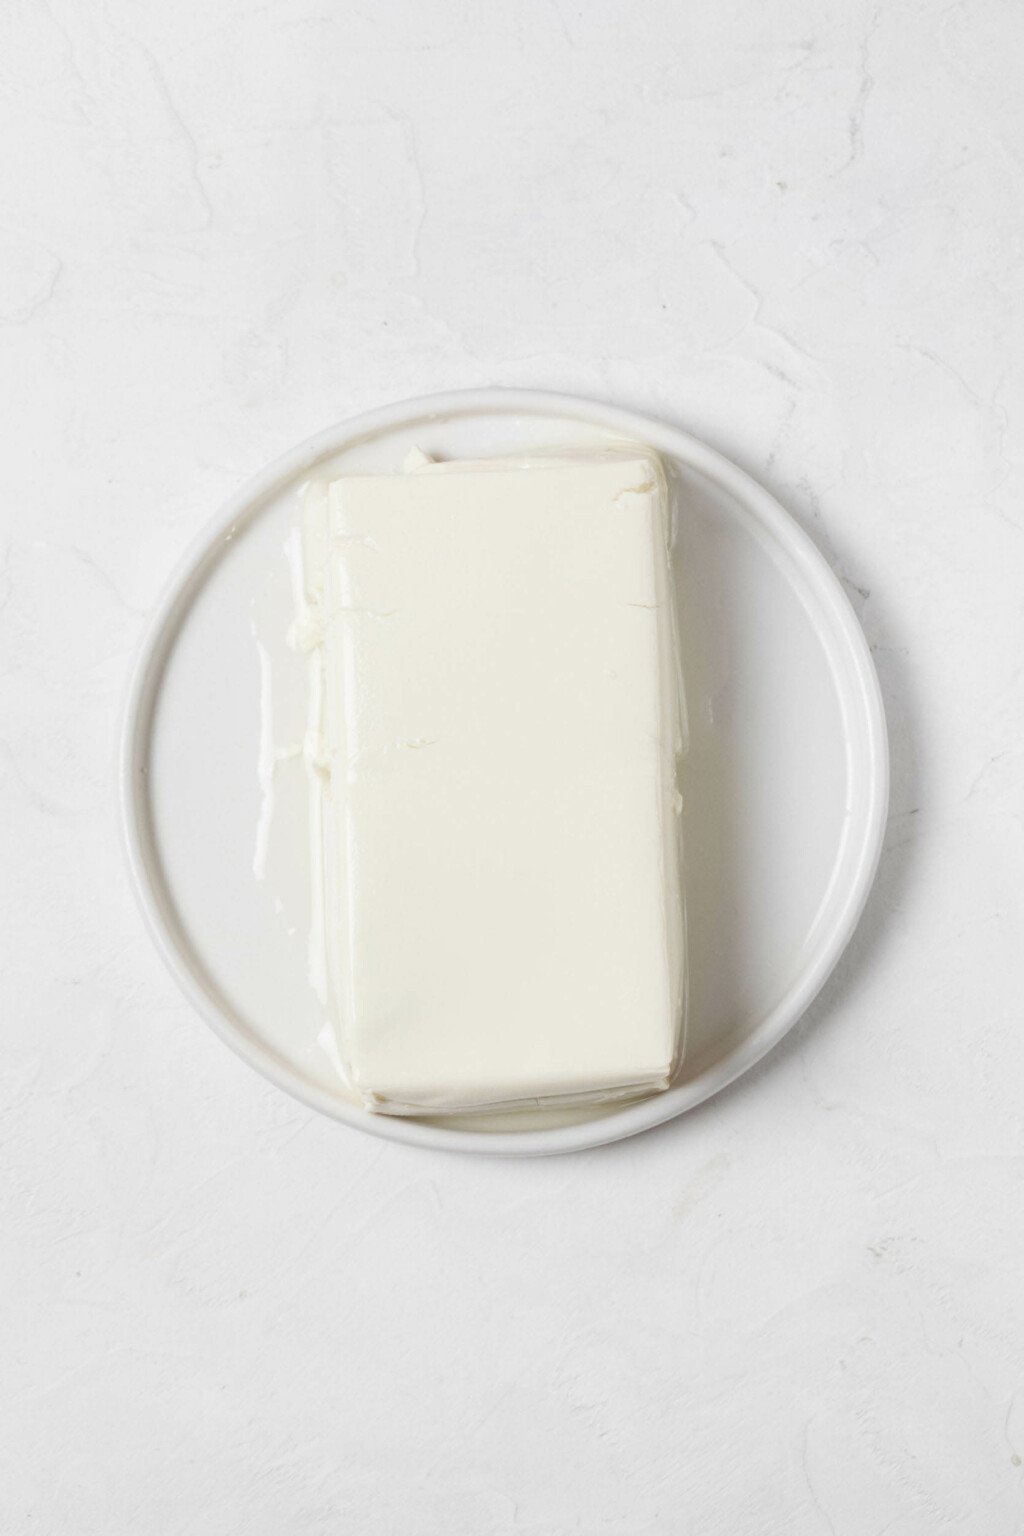 An overhead image of a white block of silken tofu, which is resting on a white plate.